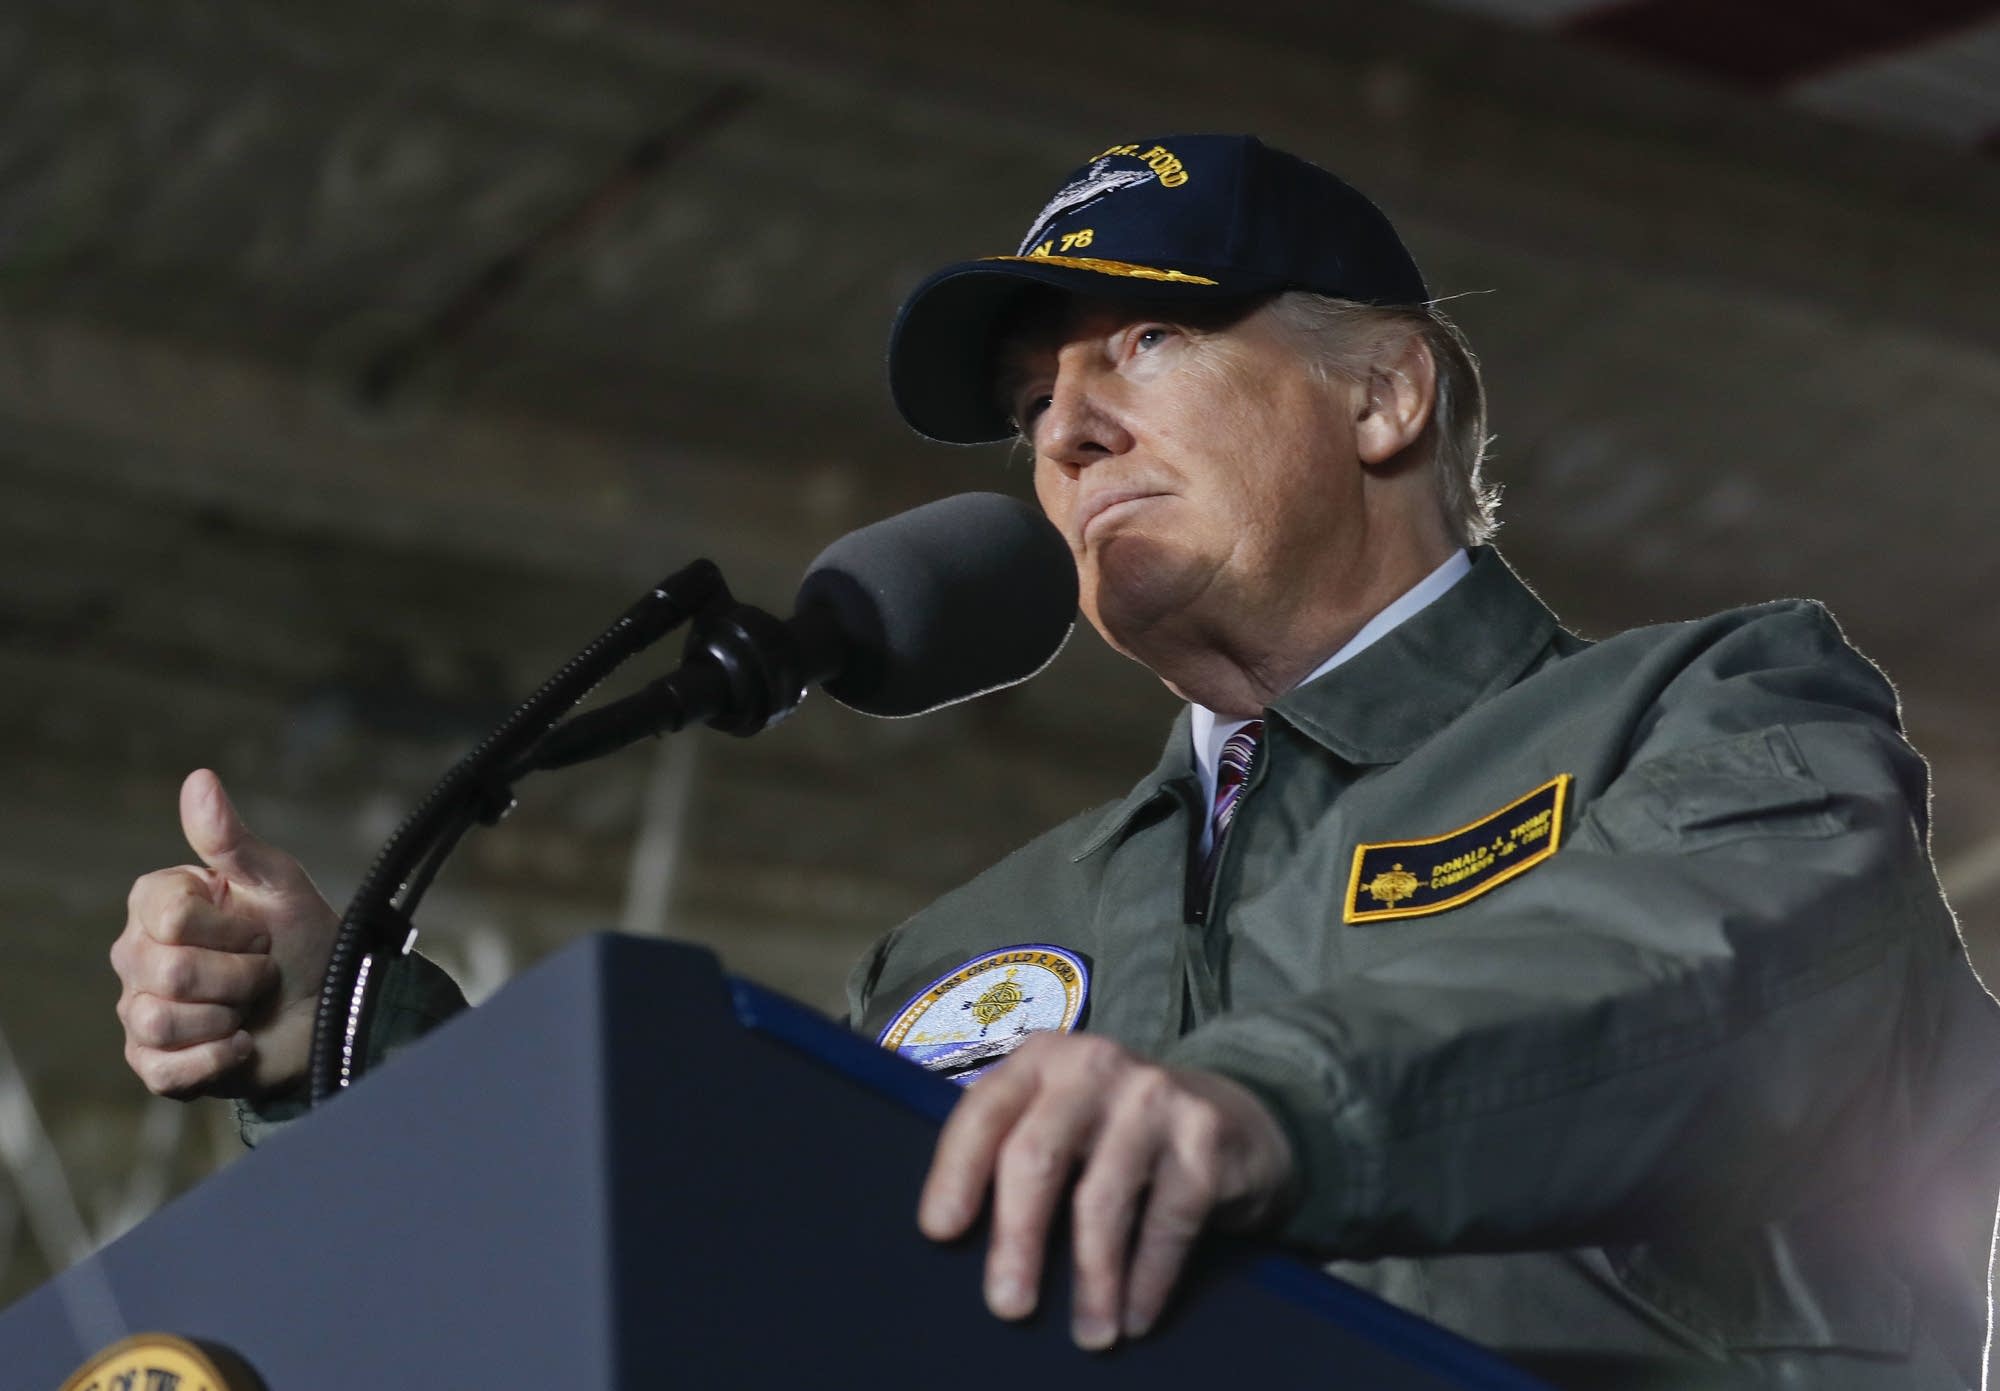 Trump, aboard Navy carrier, vows to boost defense spending